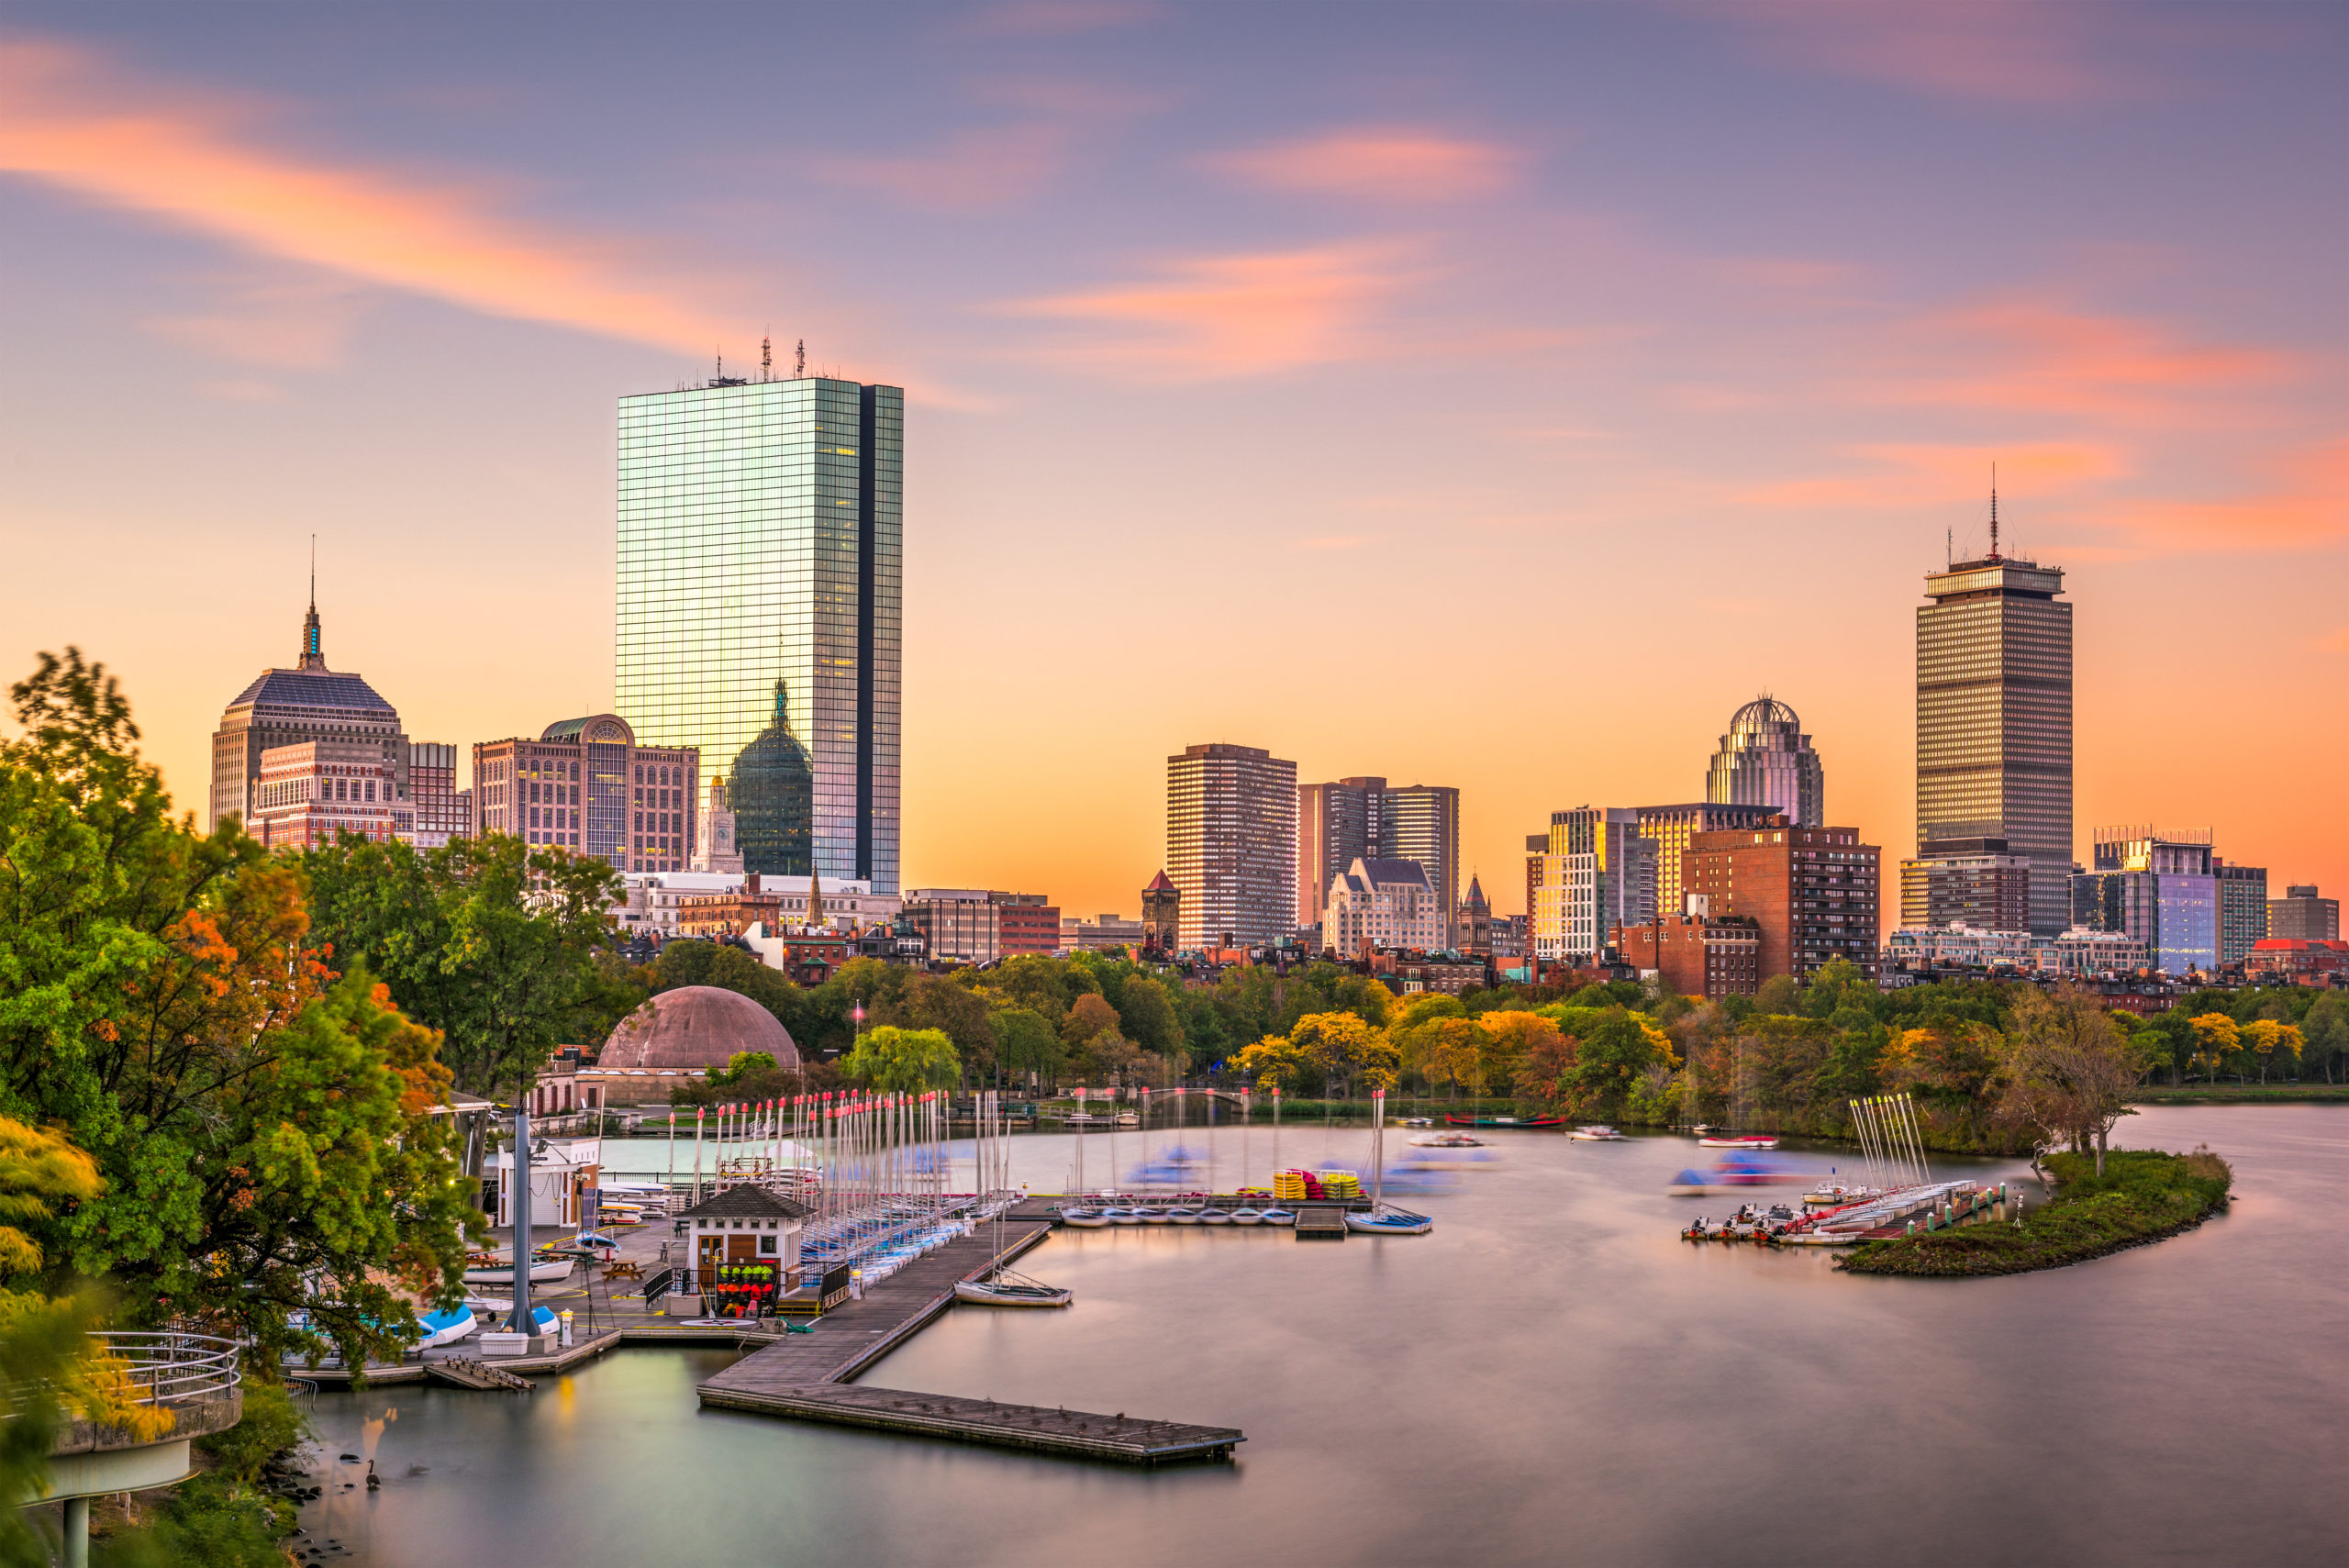 Enjoy The End Of Fall At The Esplanade In Boston, Massachusetts